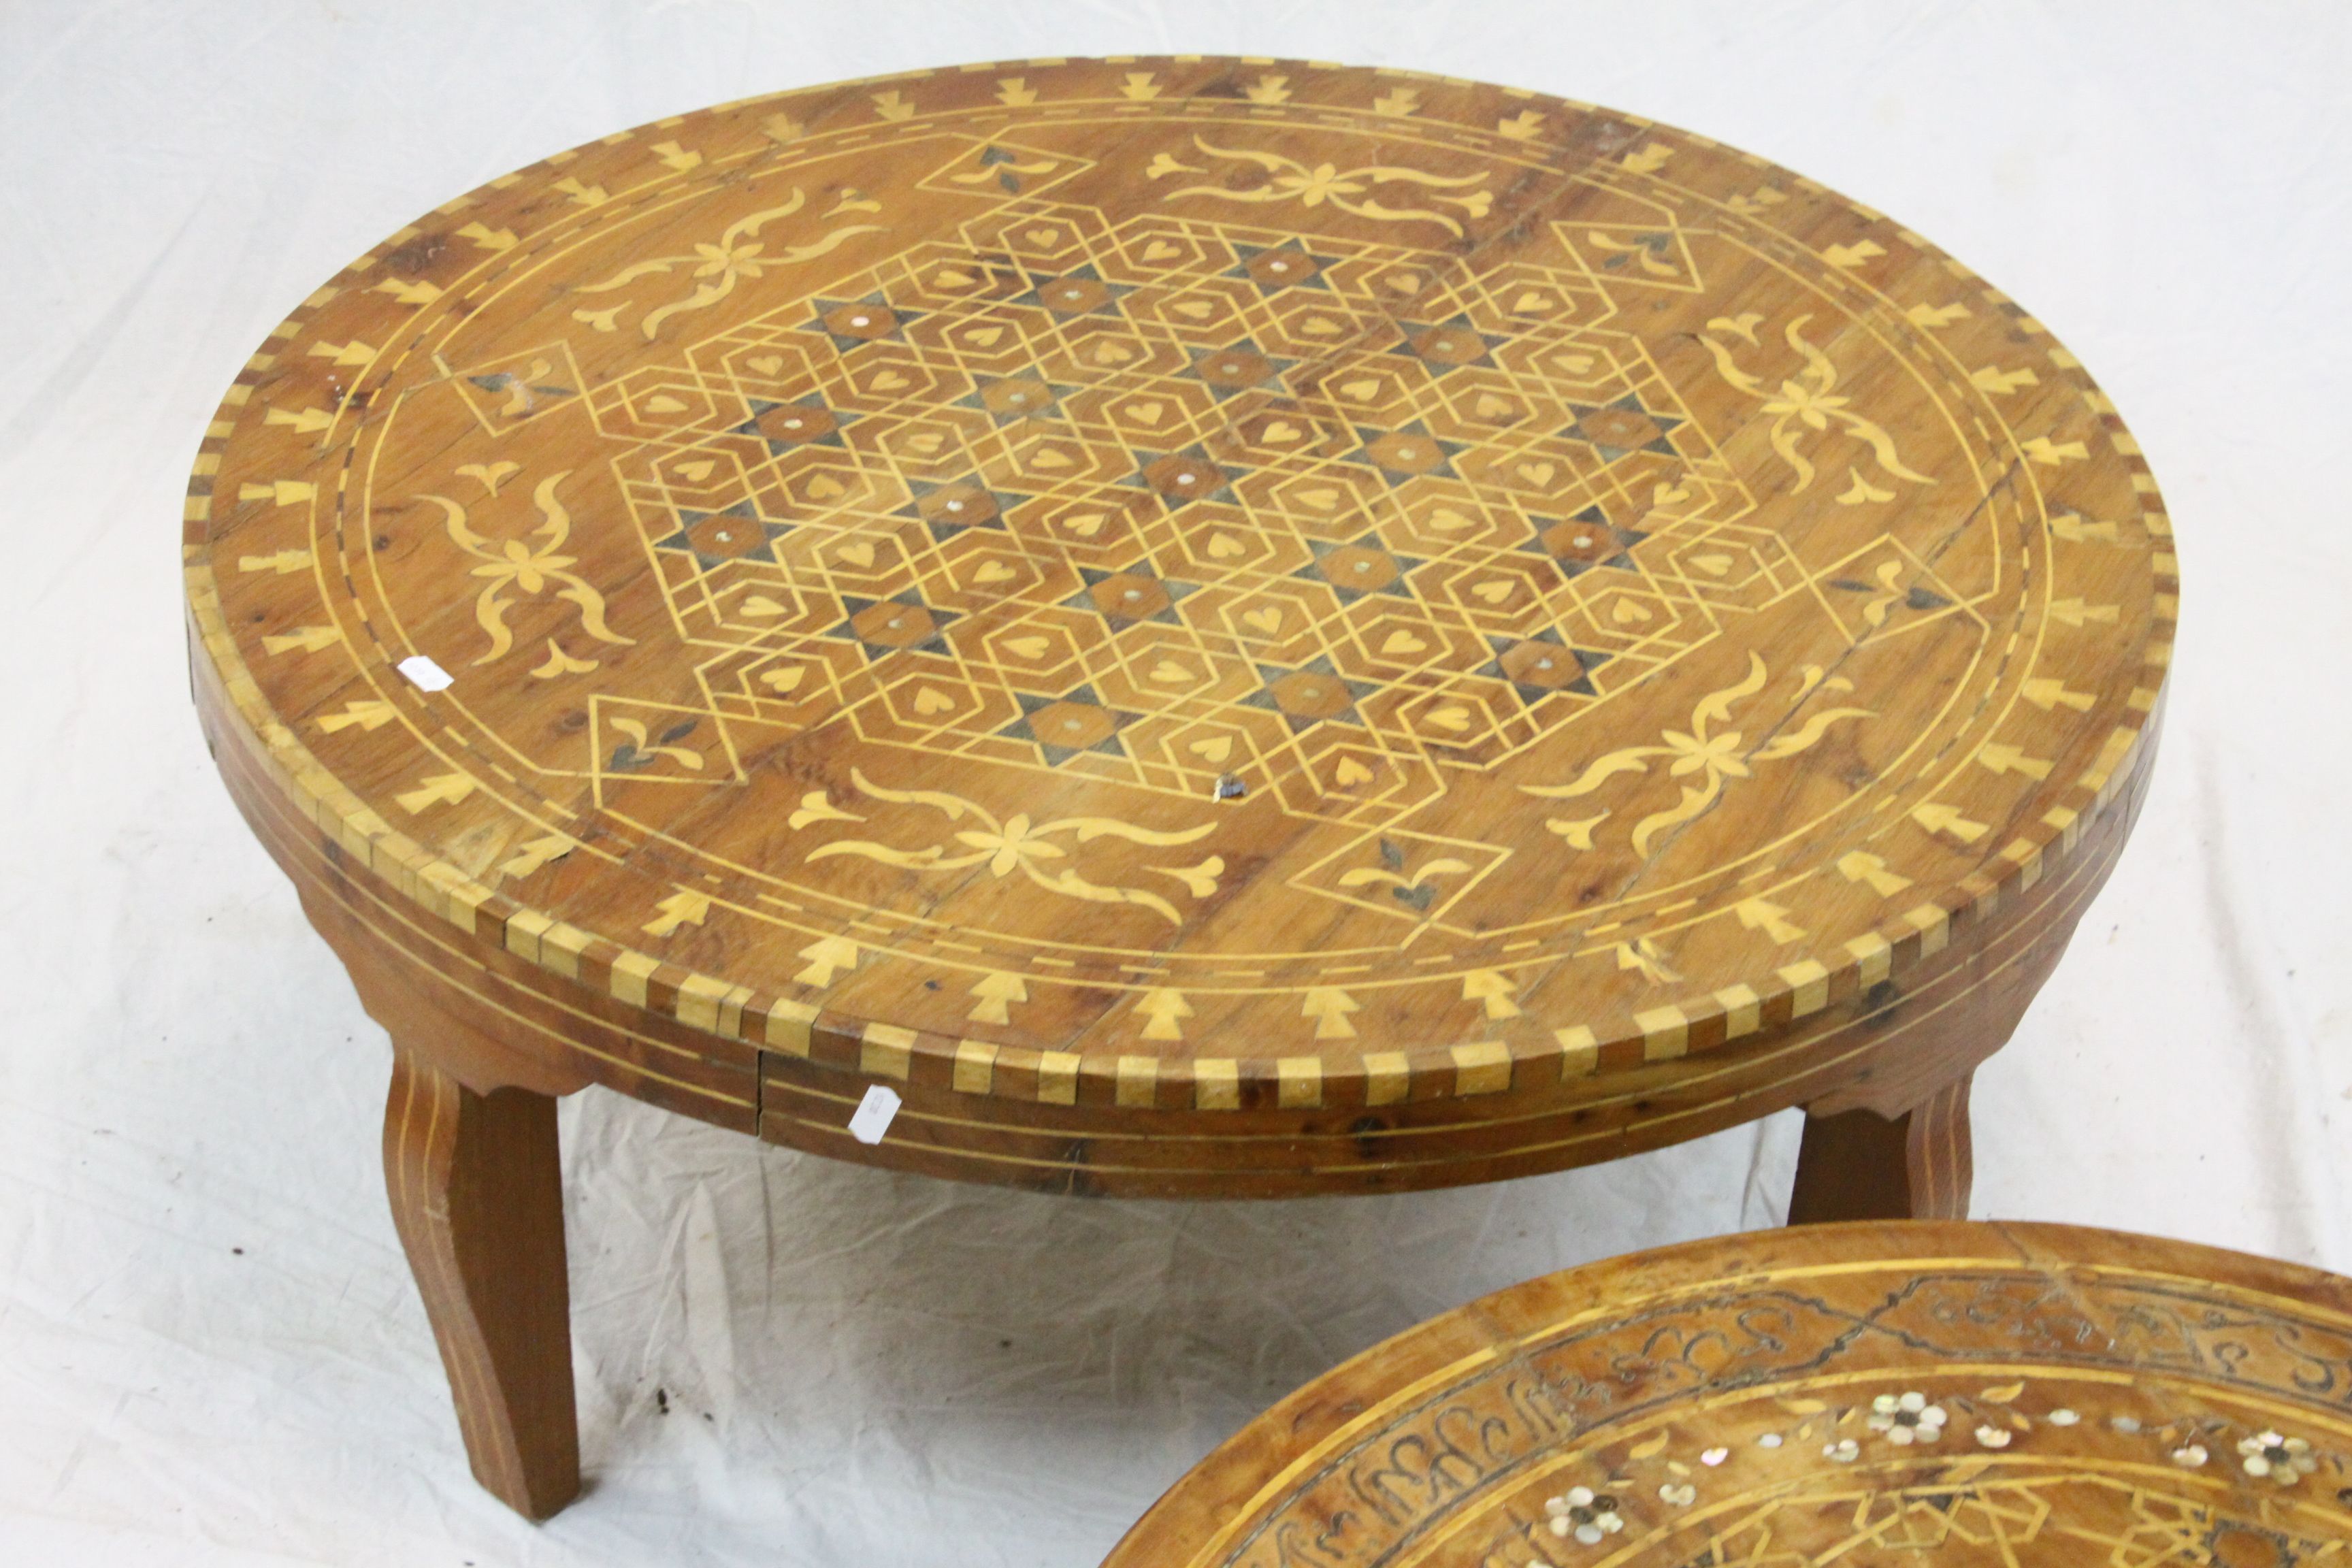 Two Middle Eastern Mother of Pearl Inlaid Circular Coffee Tables, 71cms diameter and 82cms diameter - Image 3 of 4